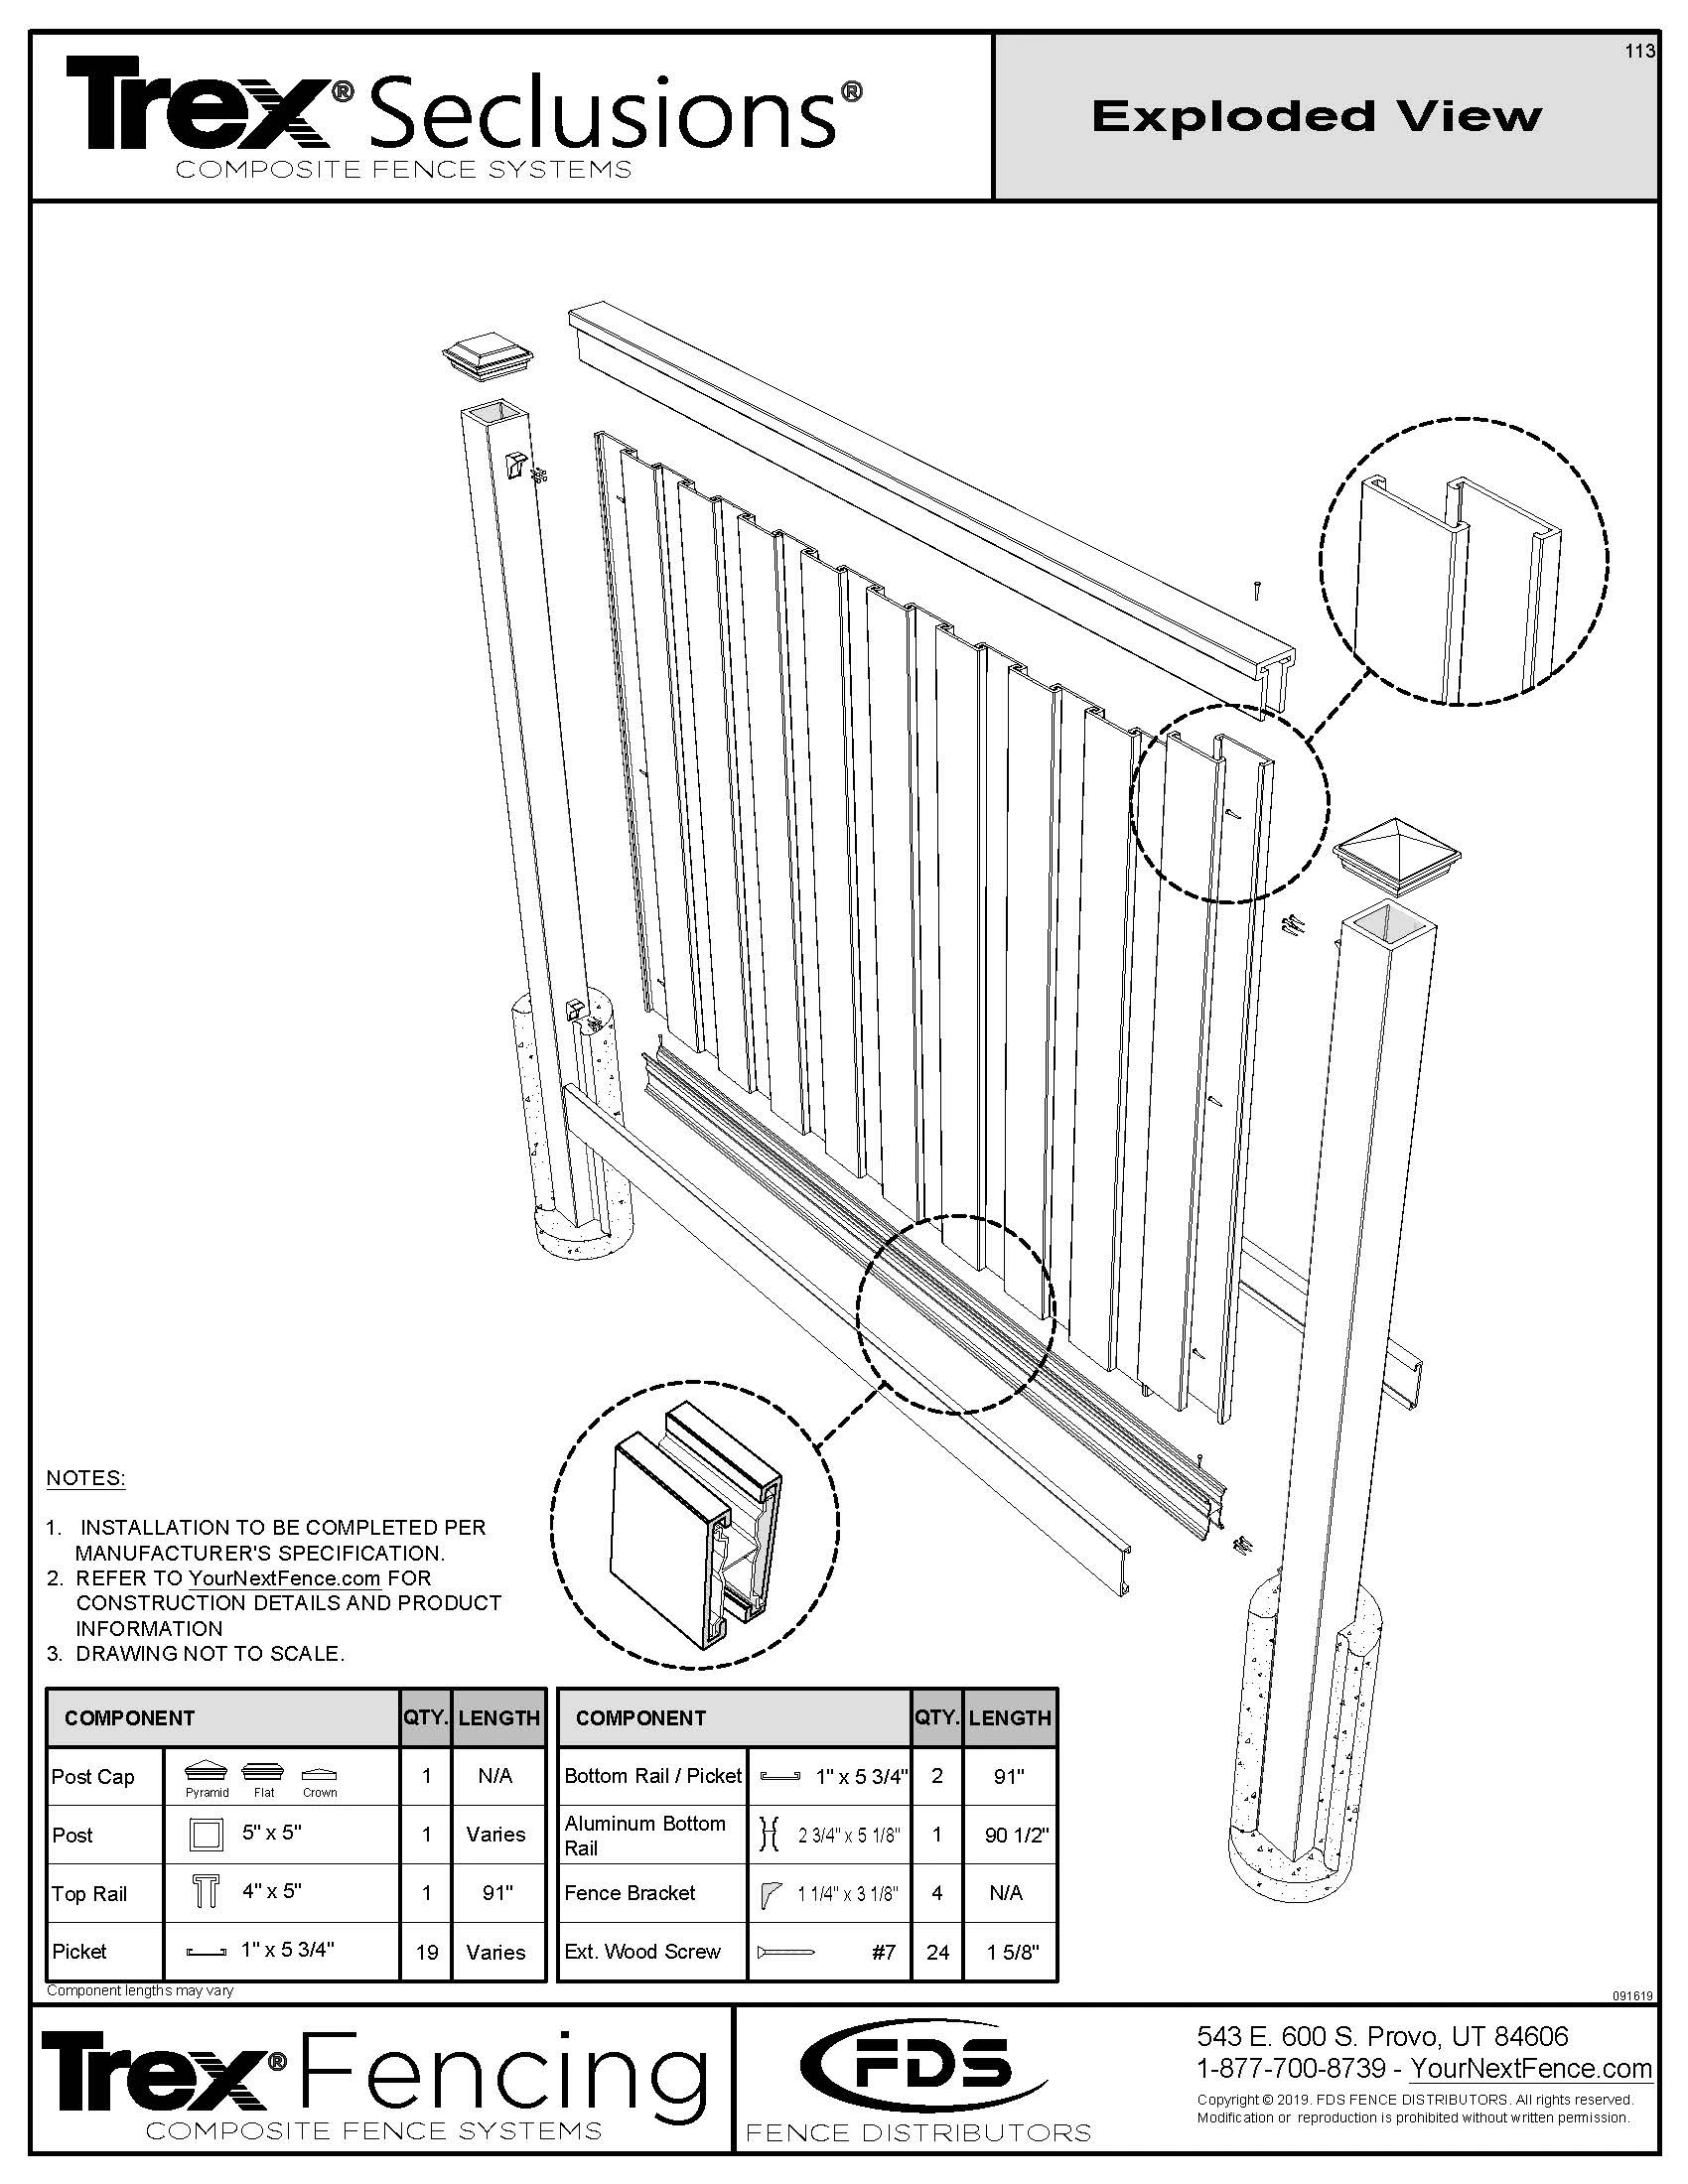 Trex Seclusions Fence Panel Kit - 4-ft. Tall 9